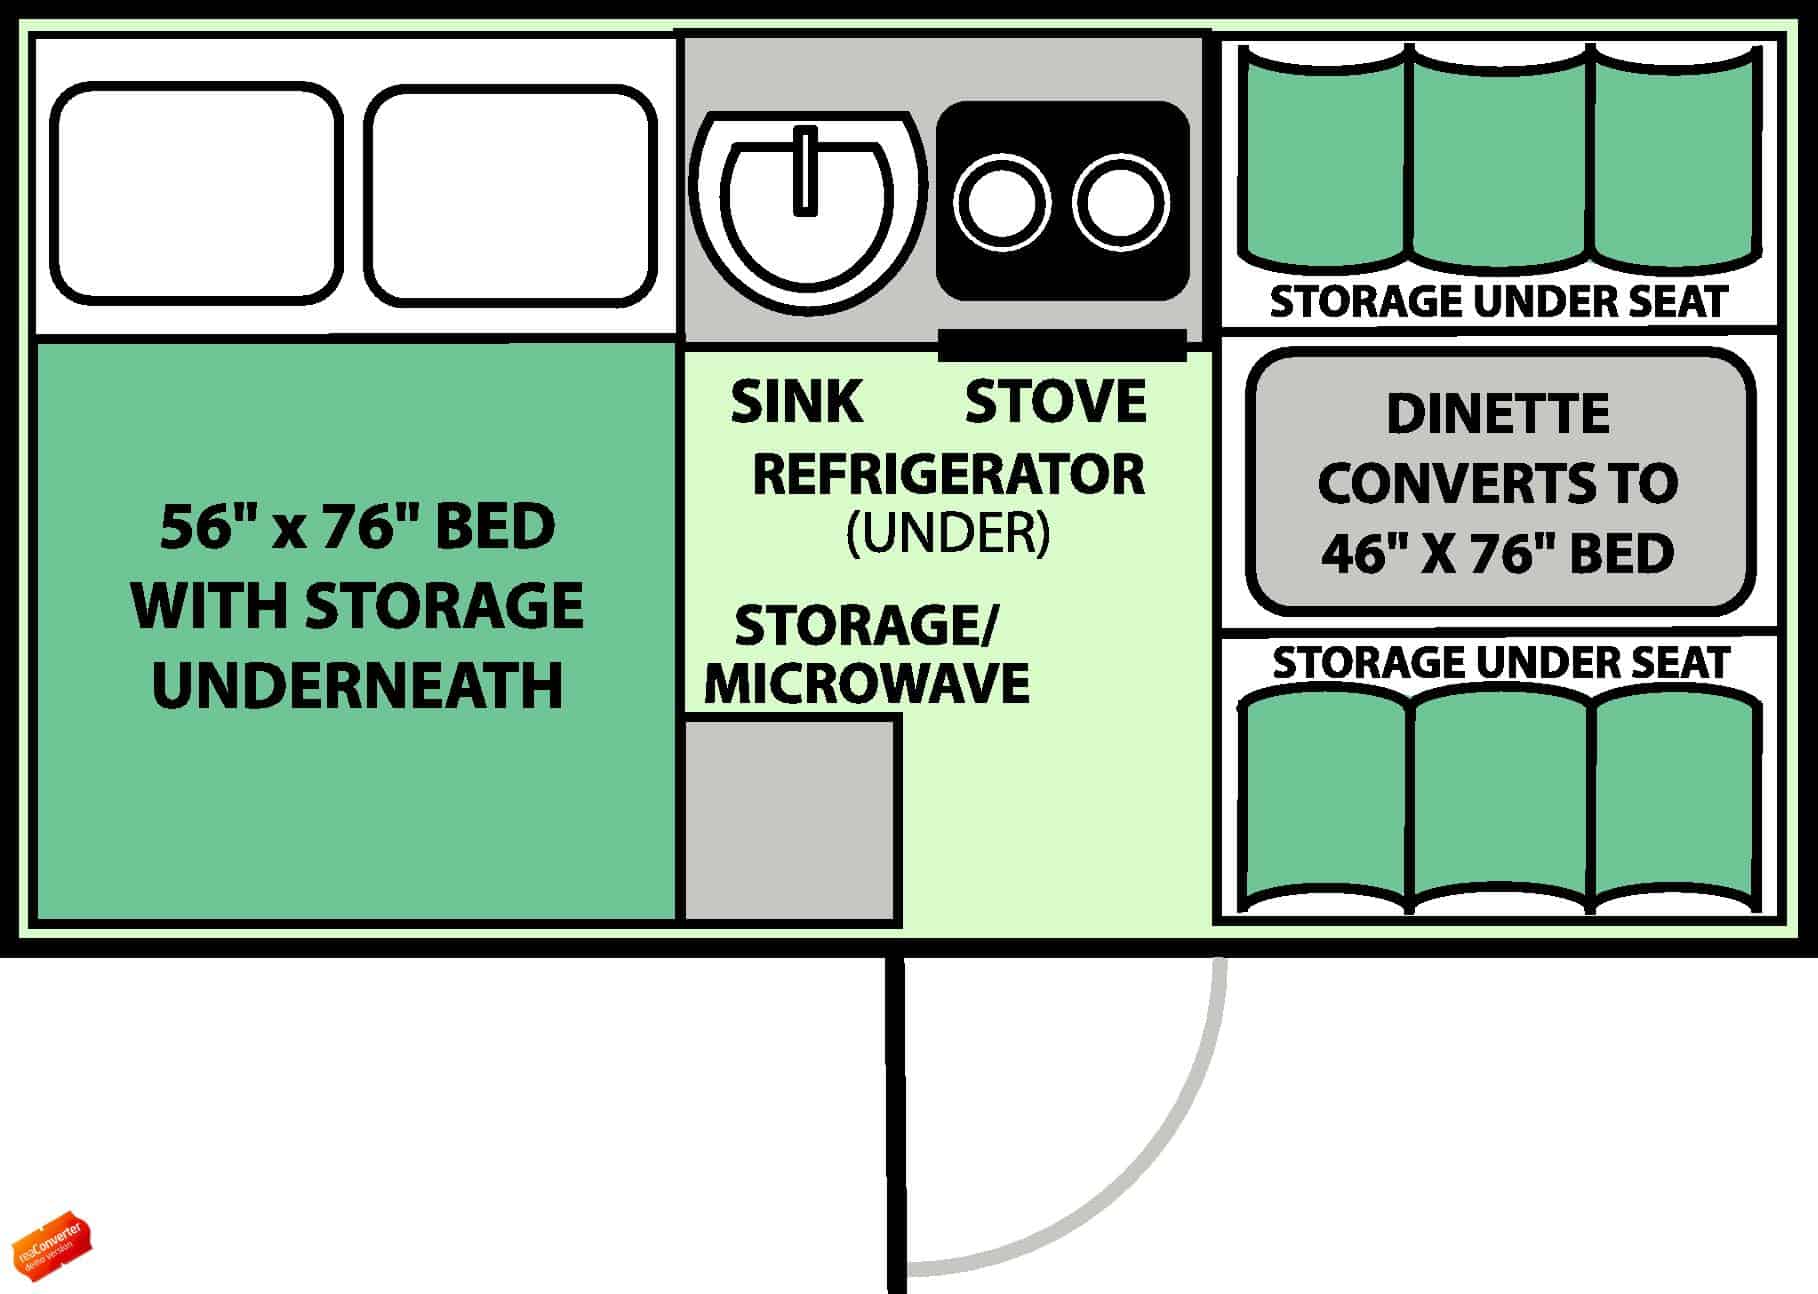 The floor plan of a small rv.